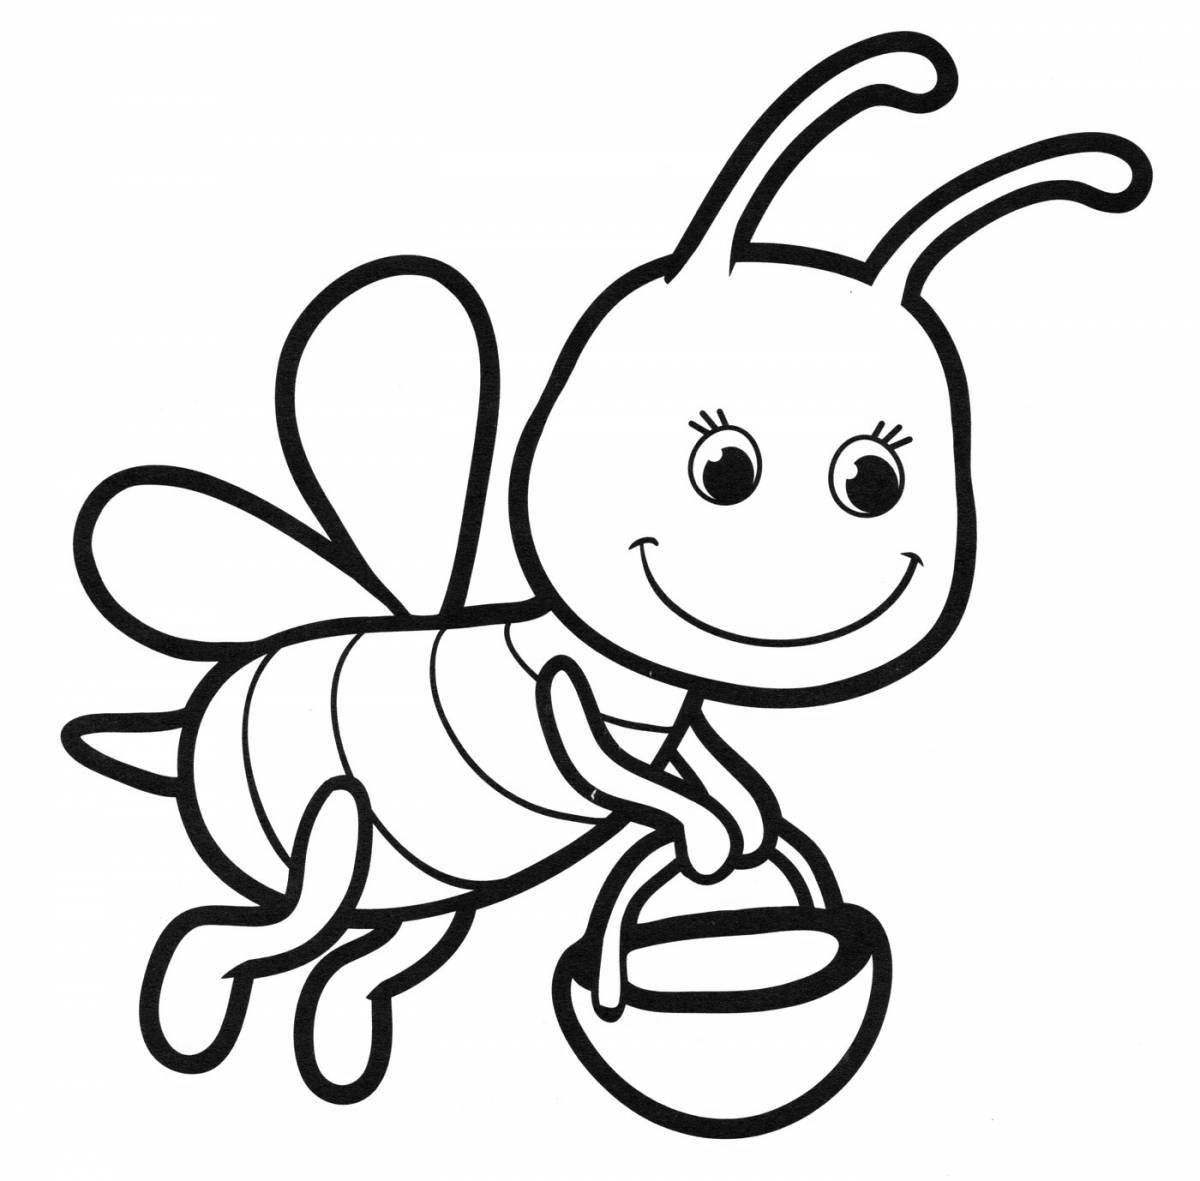 Outstanding bee coloring book for kids